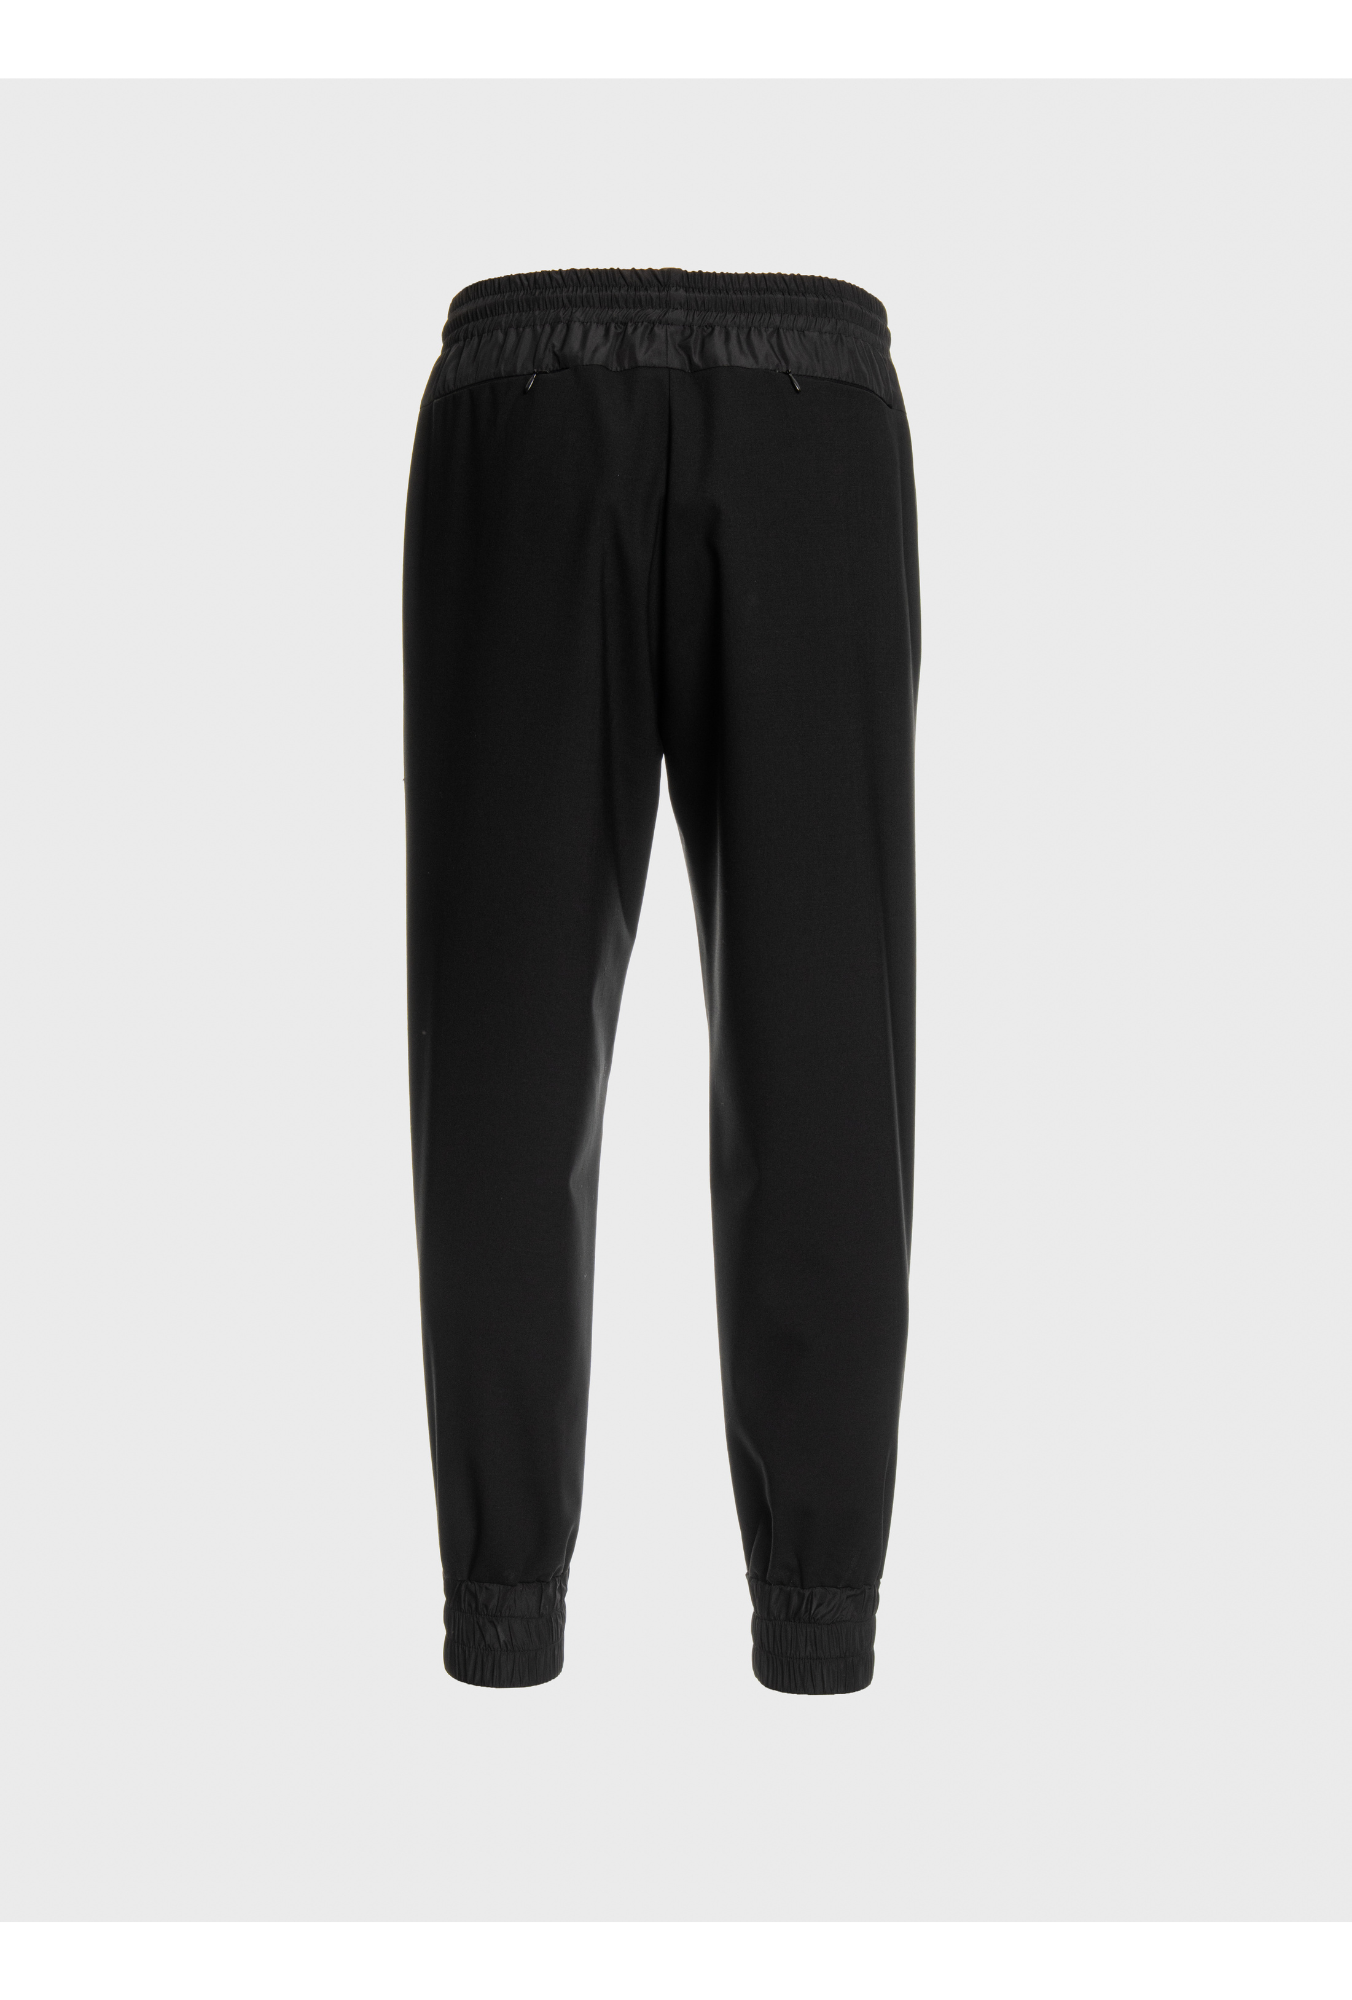 Comfy pant with nylon wastelight wool